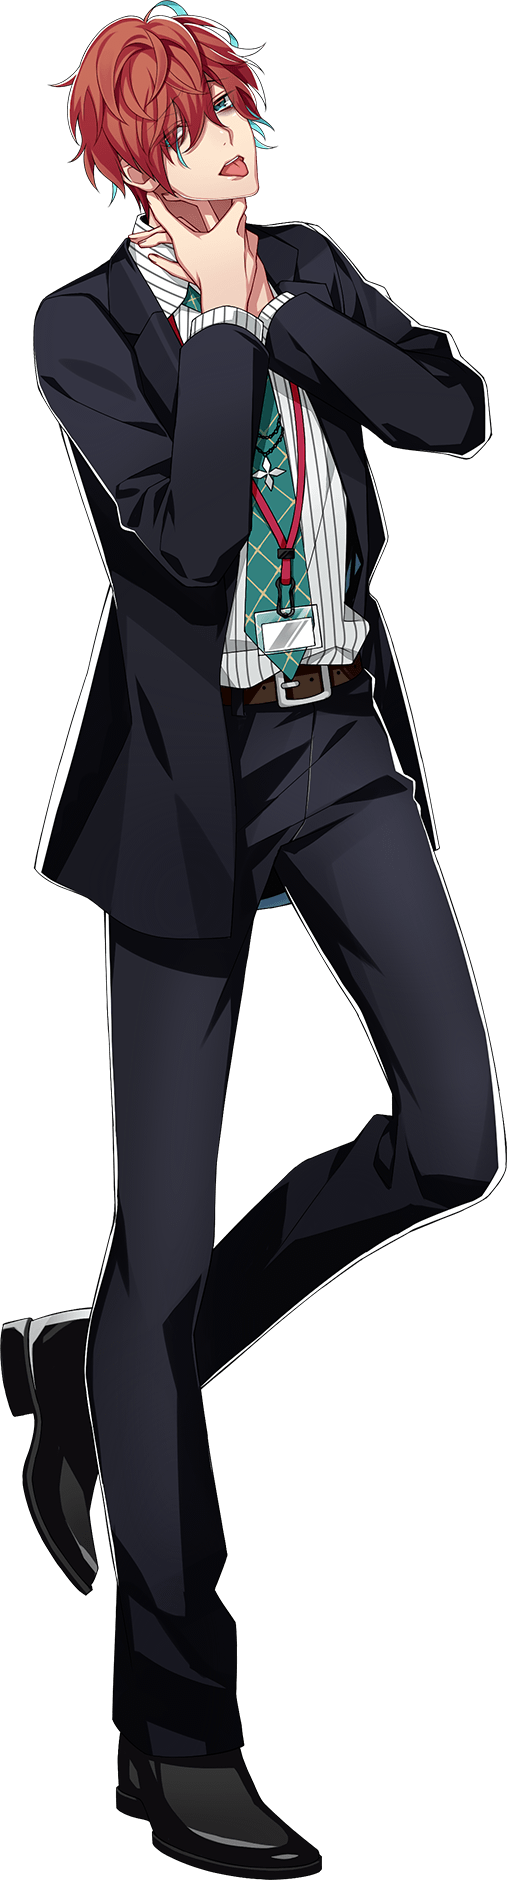 https://static.wikia.nocookie.net/hypnosis-mic/images/e/e0/Doppo_fullbody.png